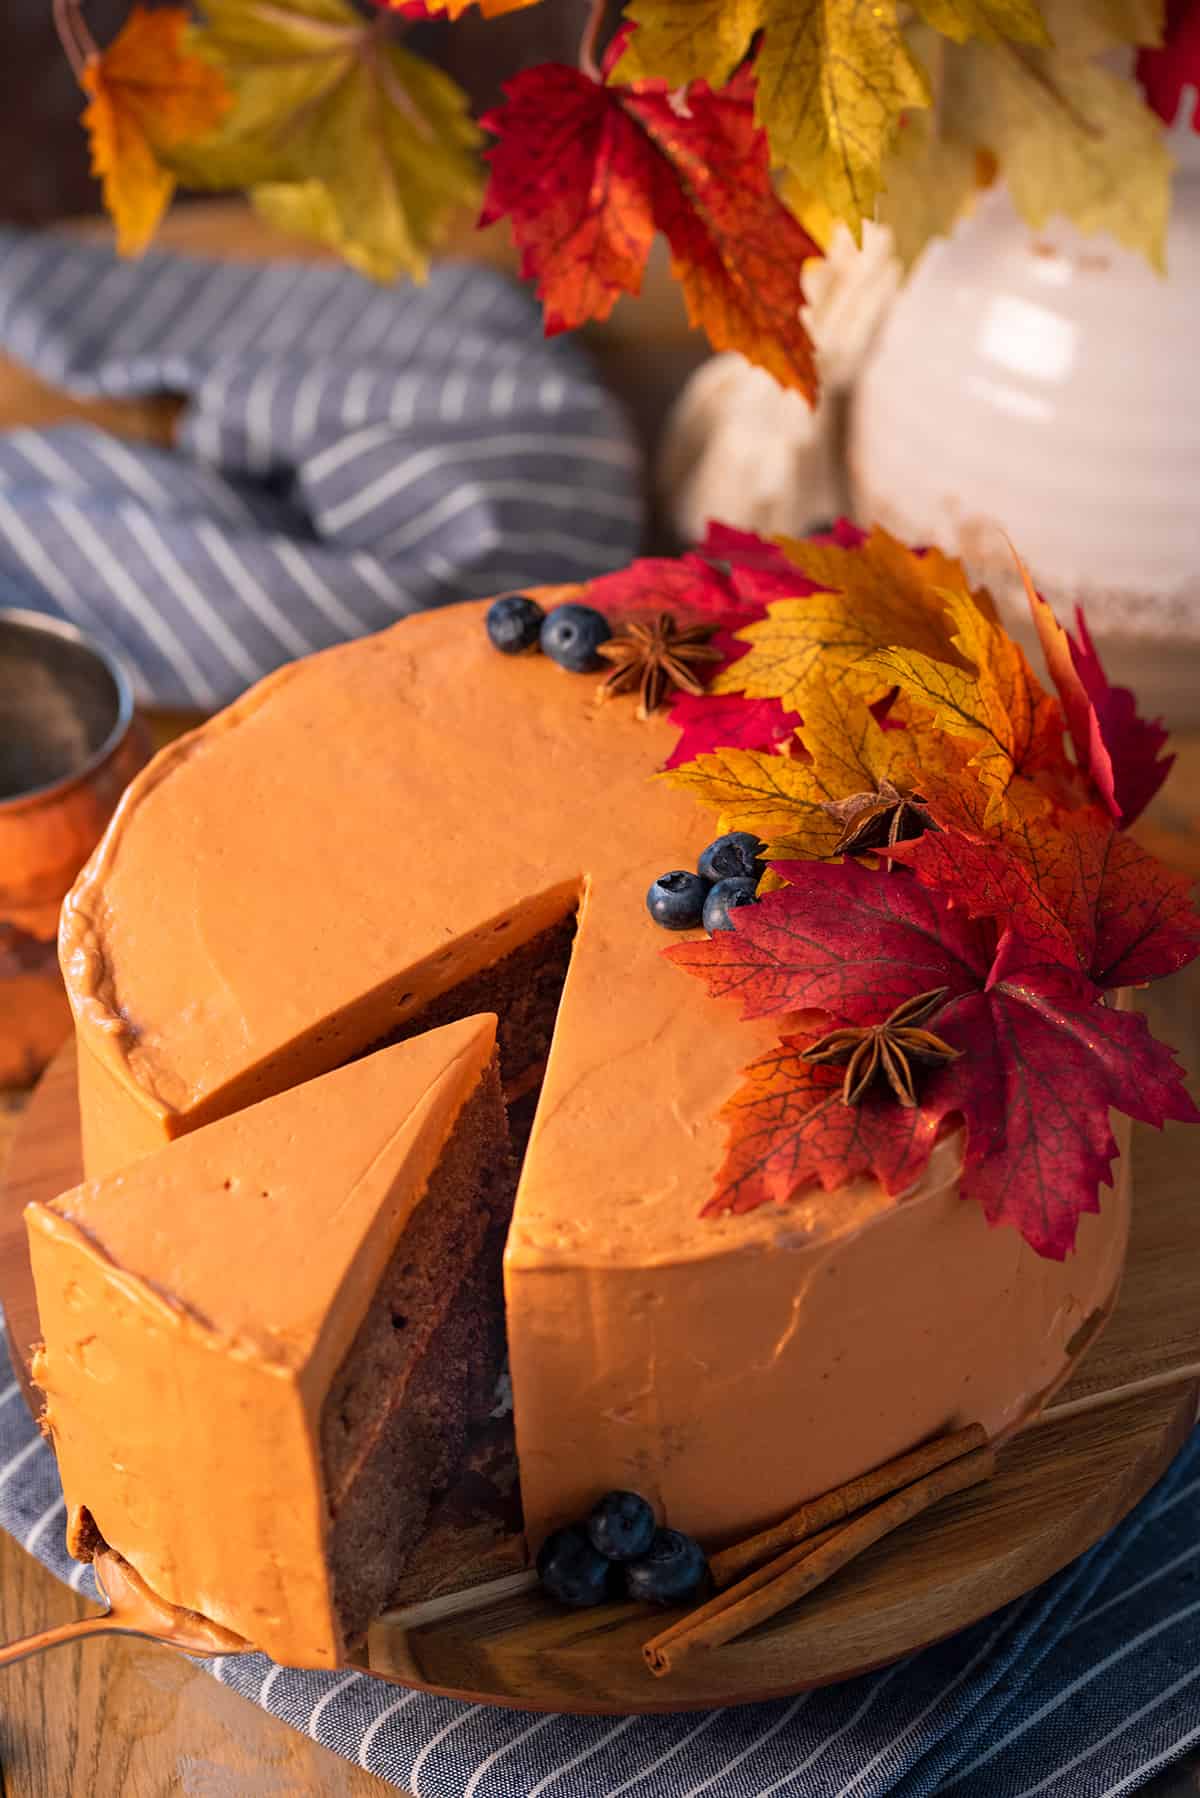 An orange fall cake decorated with red leaves and fall spices with a slice being pulled out of it.